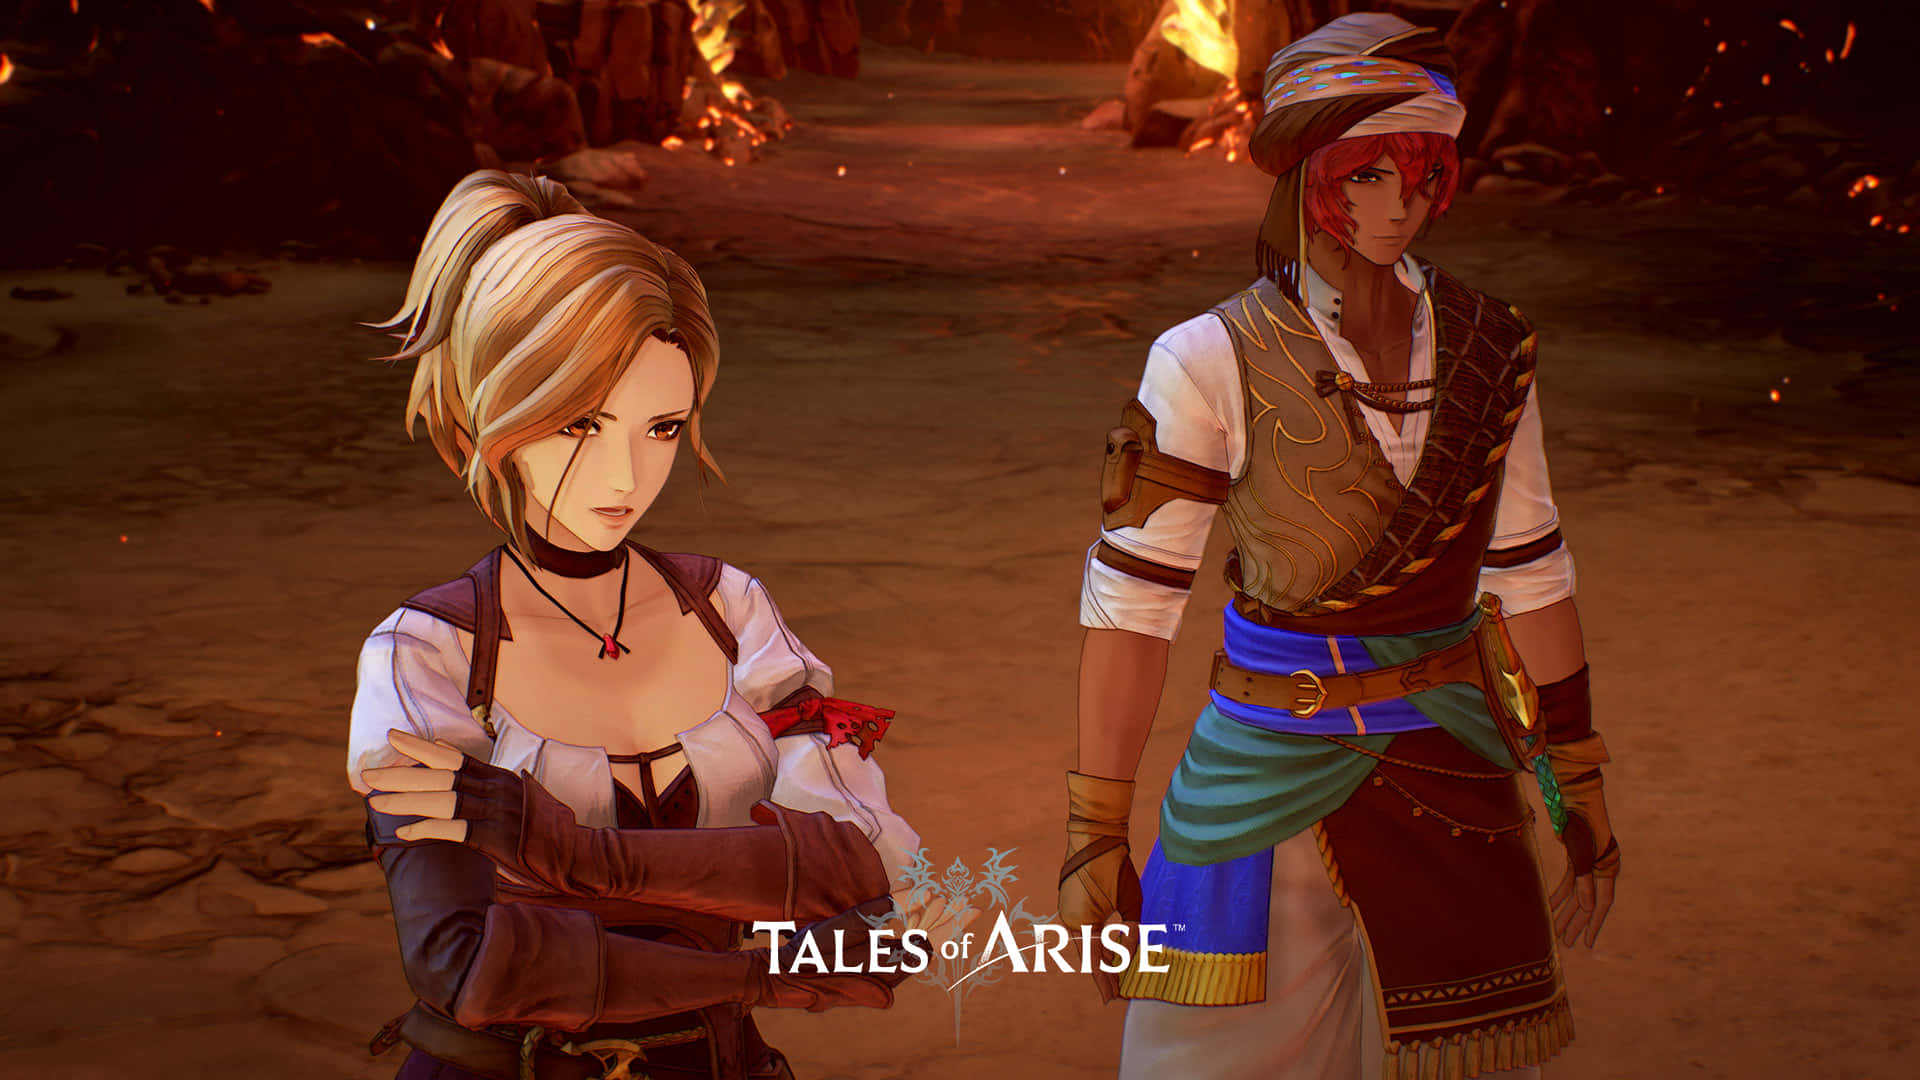 Start a journey across a world of swords and magic with Tales of Arise Wallpaper